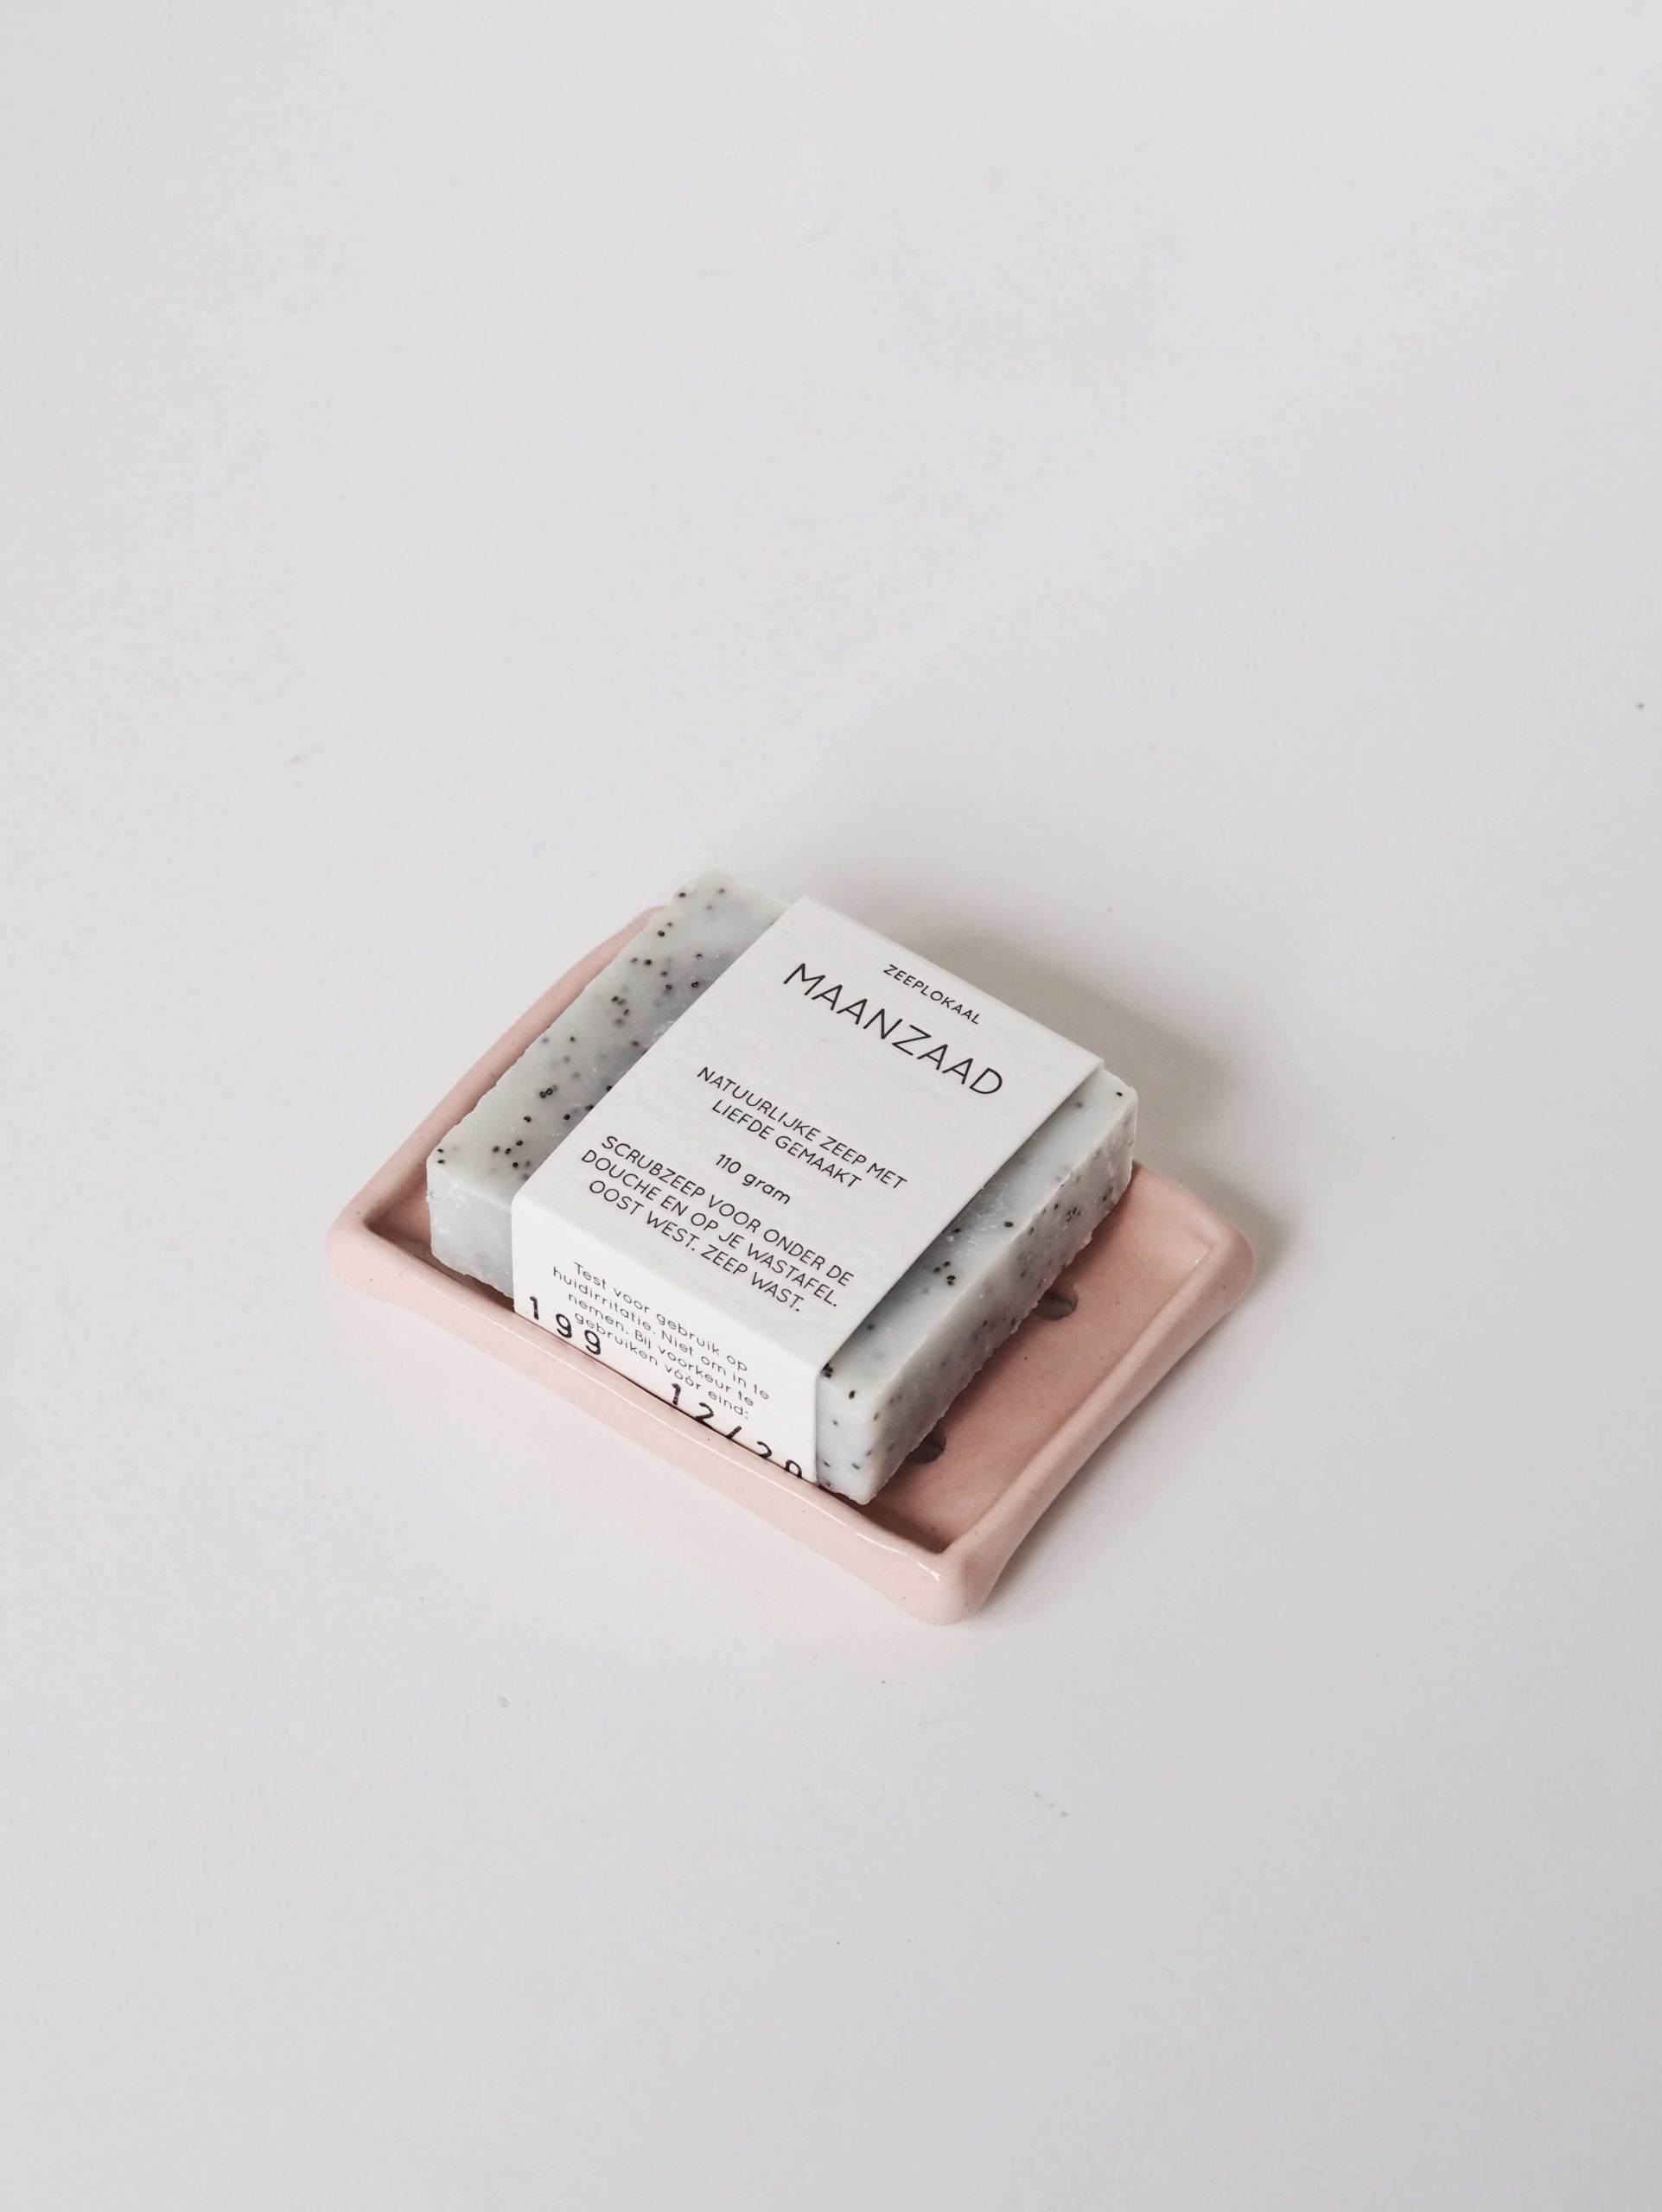 Profiles: Het Zeeplokaal – “At home making soap in a baking tray, that’s how it started.”